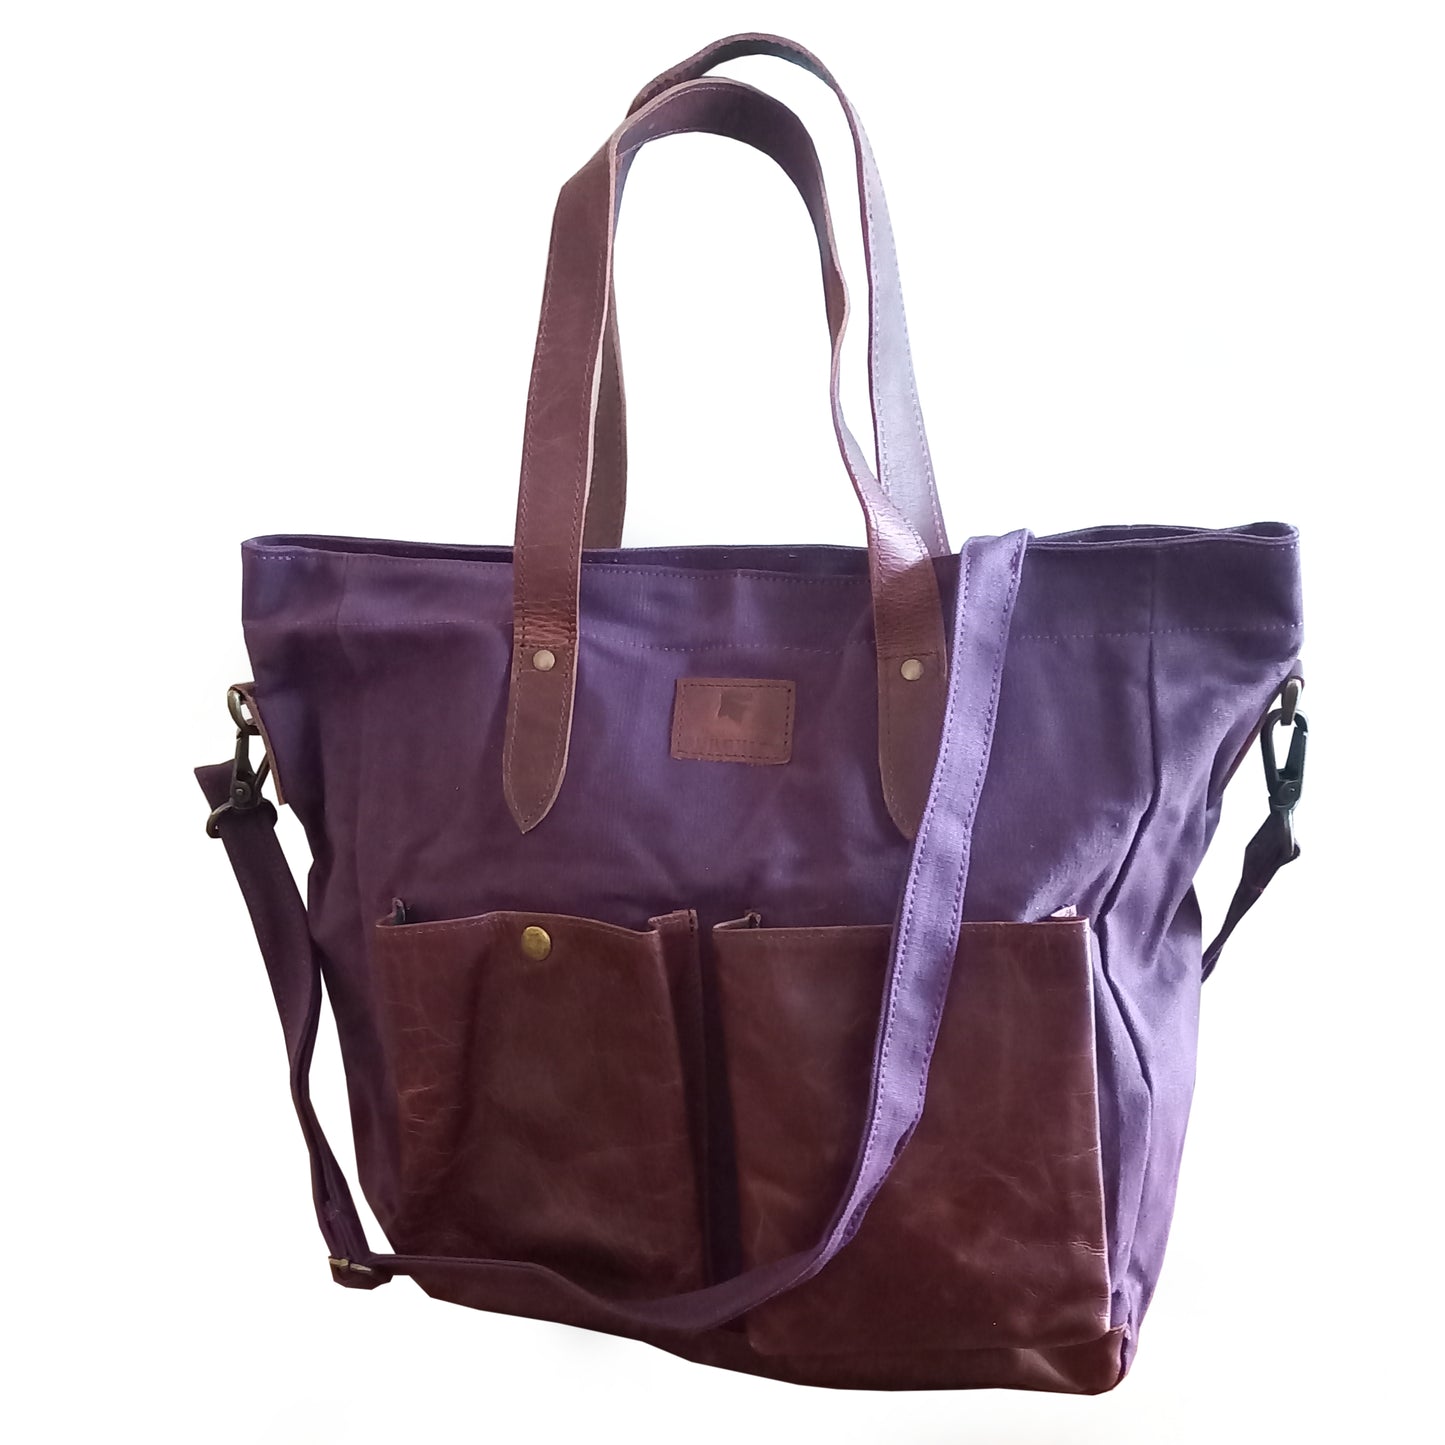 Blenheim – Large Canvas and Vintage Leather Tote